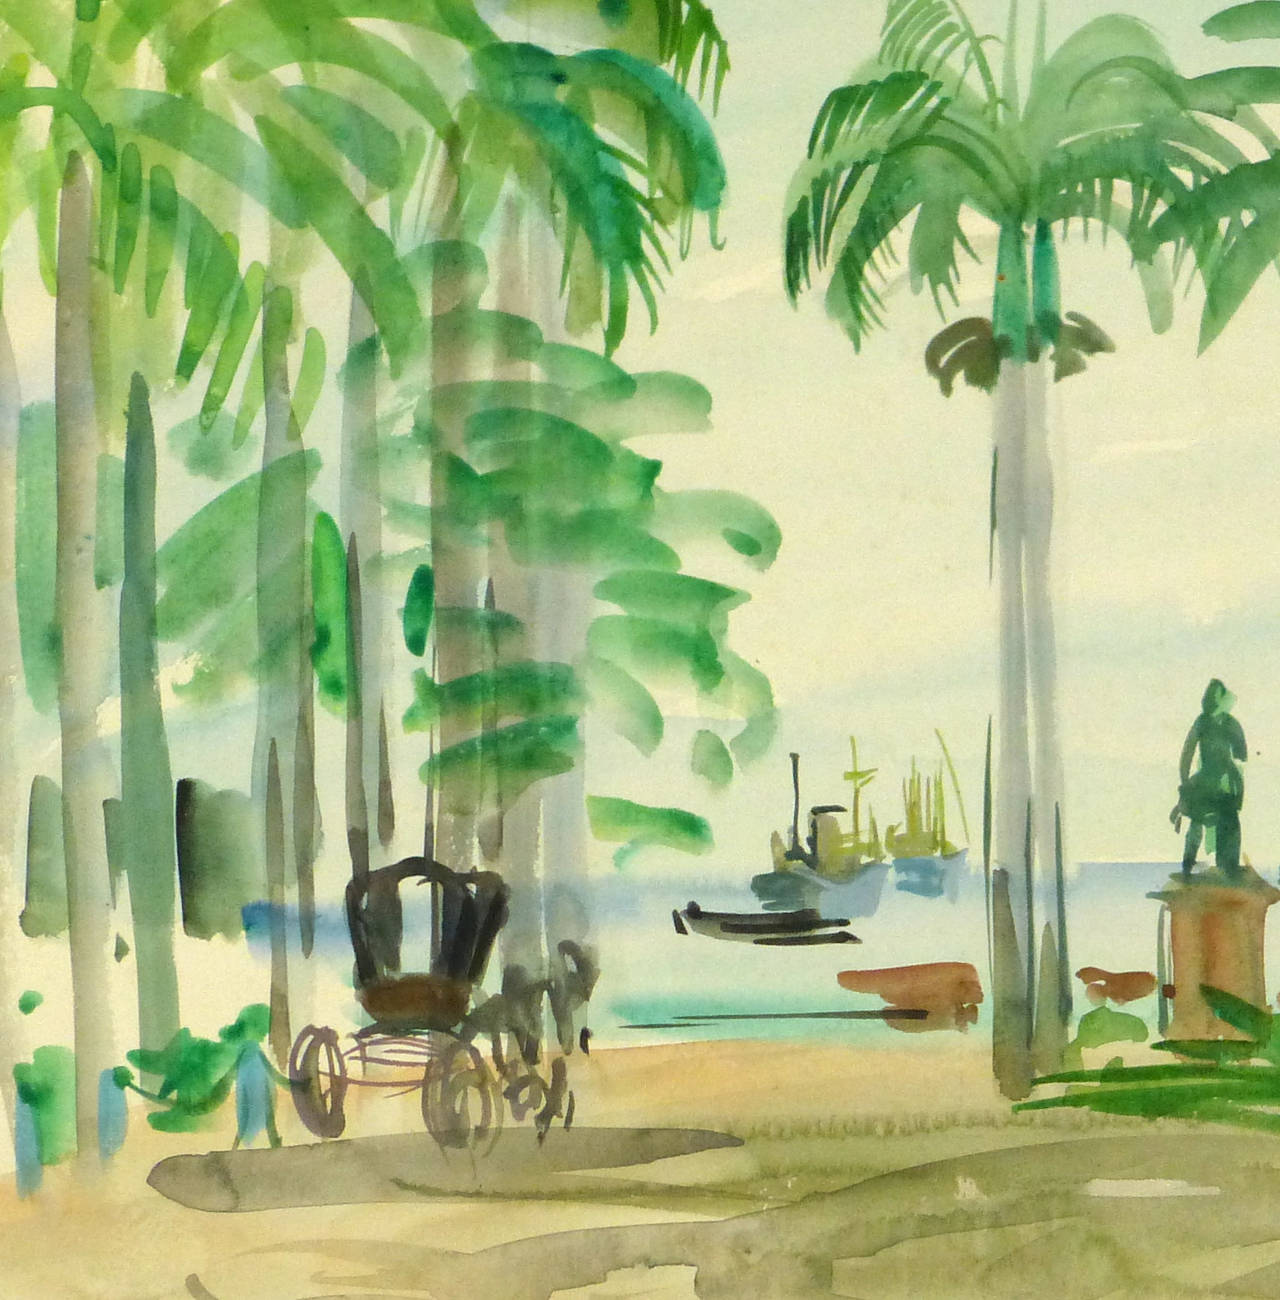 Sunny and bright watercolor landscape of a port in Madagascar lush with tropical vegetation by French artist Stéphane Magnard (1917-2010), circa 1950. Unsigned.

Original vintage one-of-a-kind artwork on paper displayed on a white mat with a gold